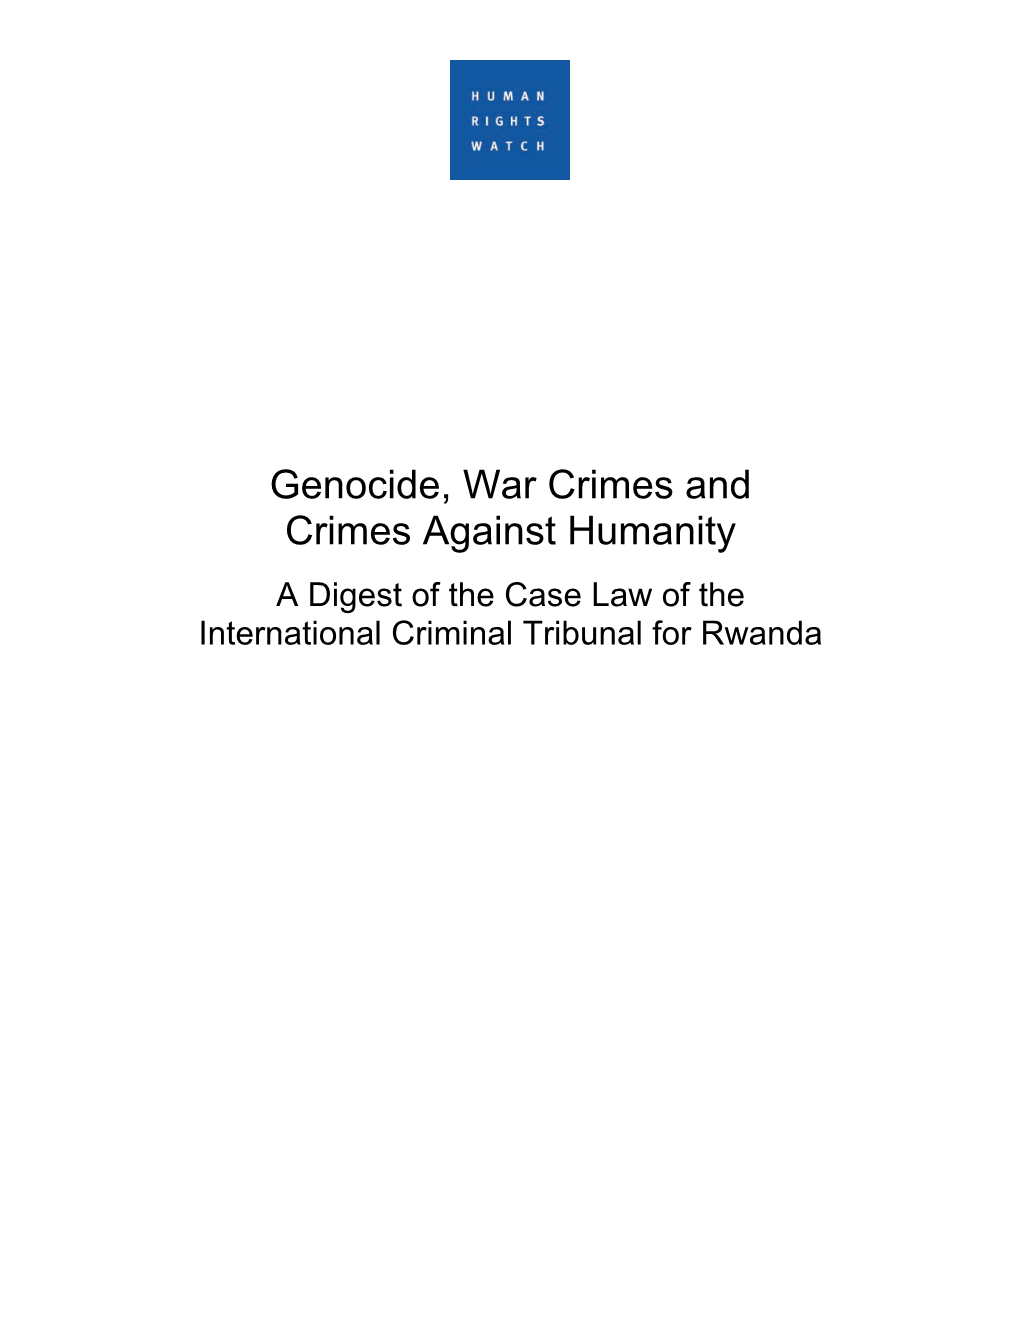 Genocide, War Crimes and Crimes Against Humanity